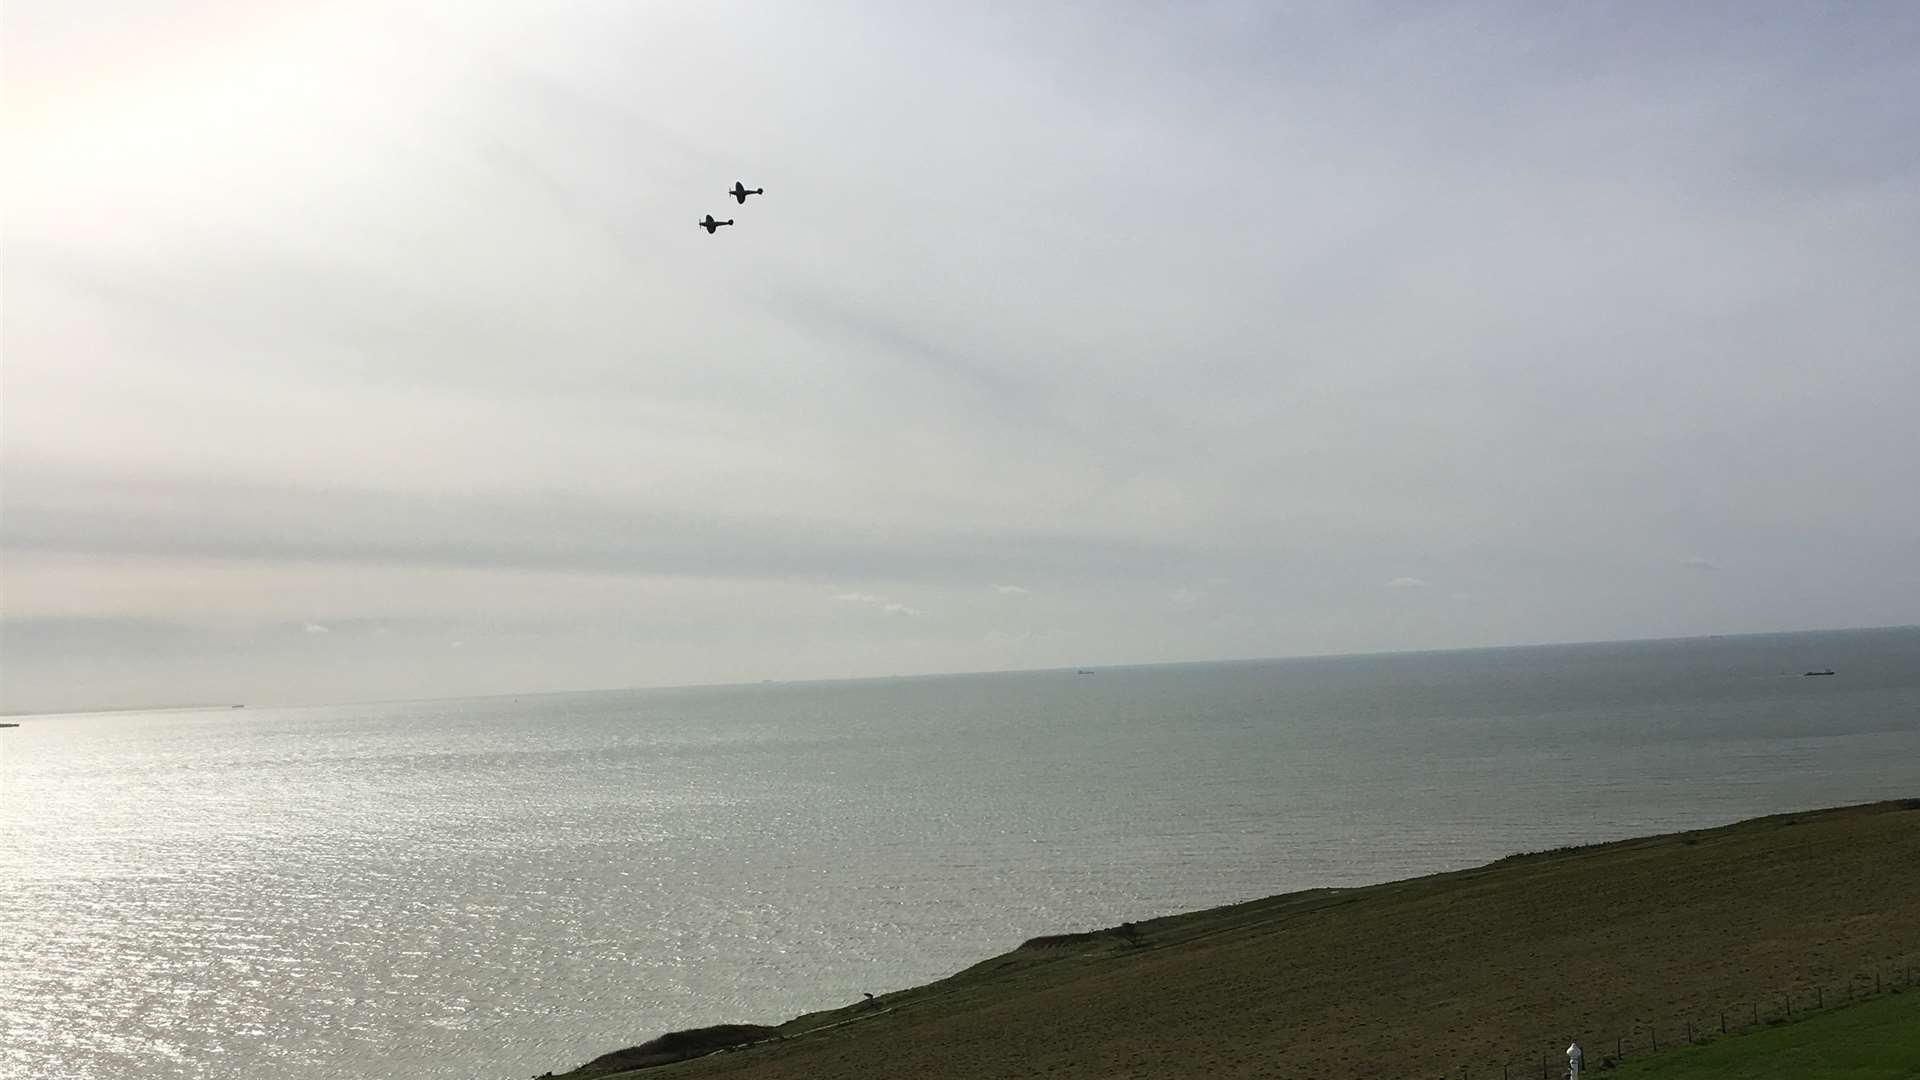 Spitfires did fly over the White Cliffs of Dover to celebrate Dame Vera Lynn's 100th birthday